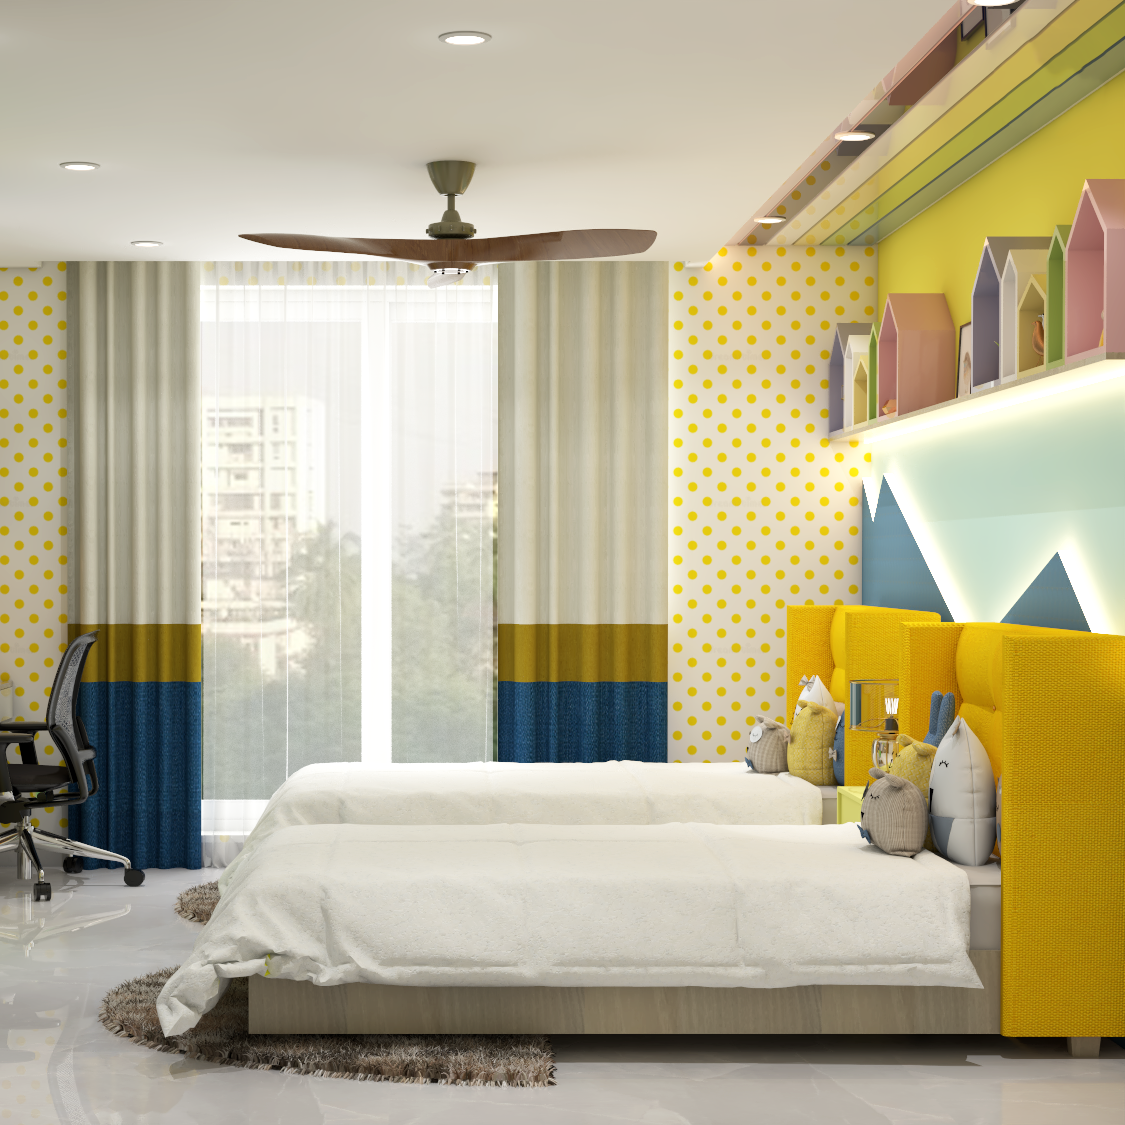 Contemporary Style Kid's Bedroom Design With Twin Beds